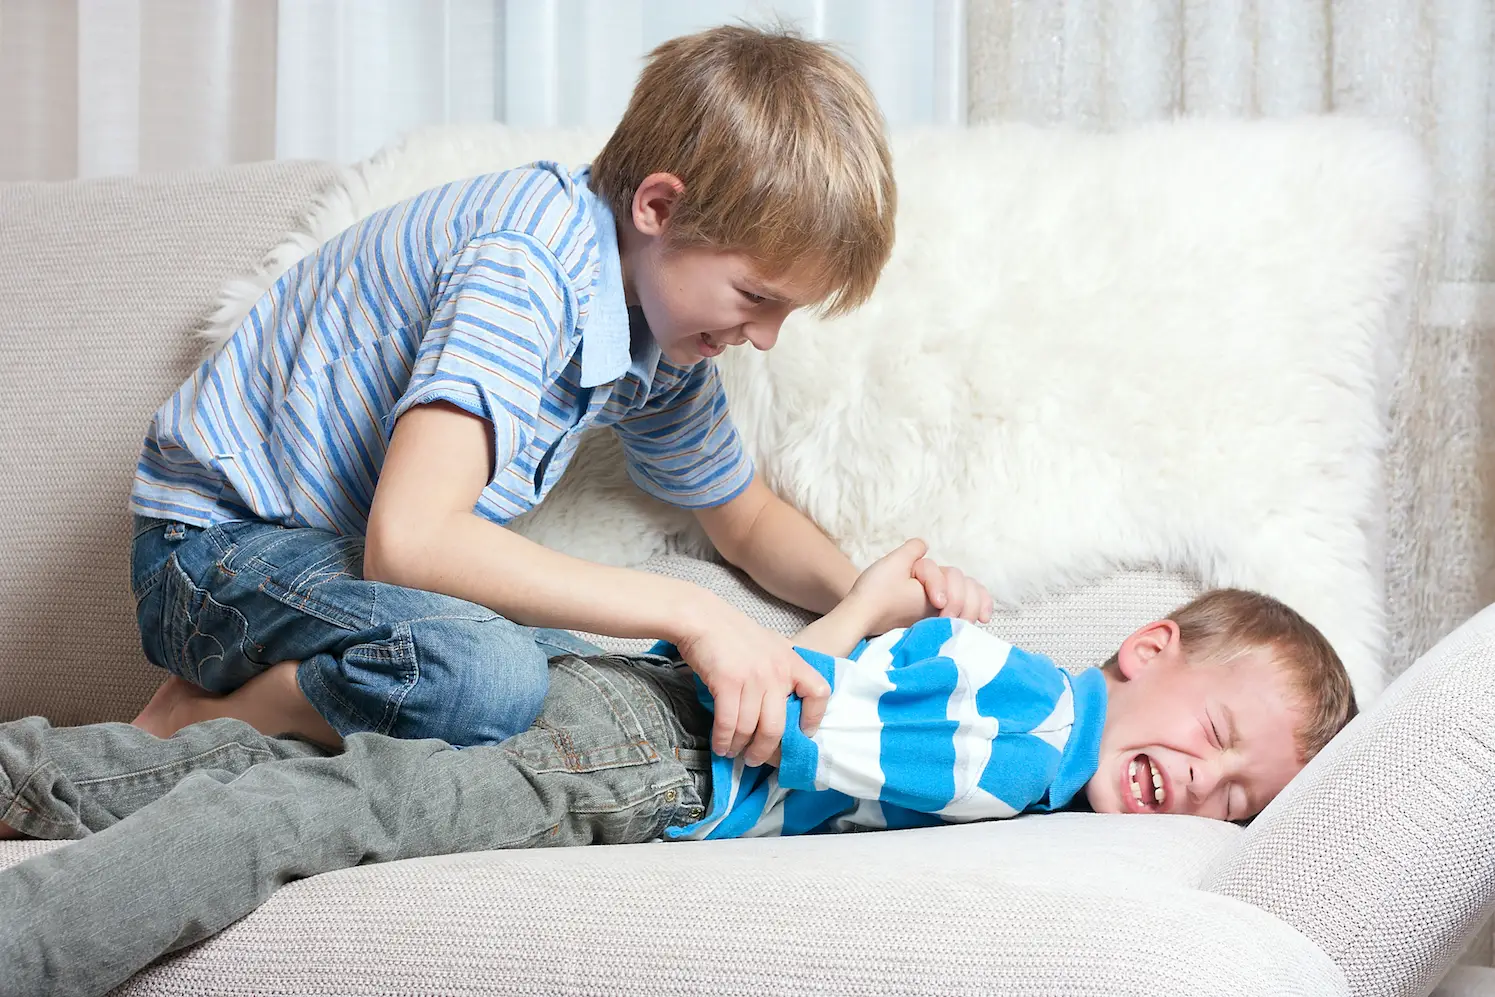 How To Know If Your Brother Is Abusive?